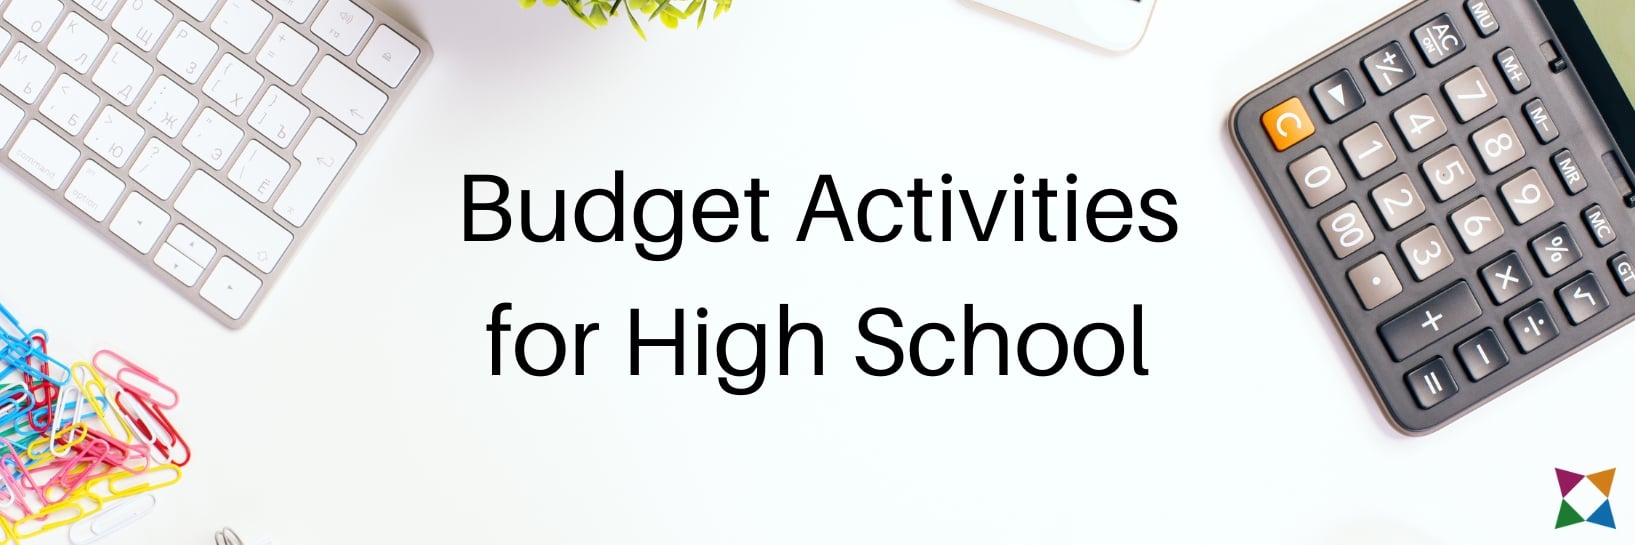 4 Top Budgeting Activities for High School Students